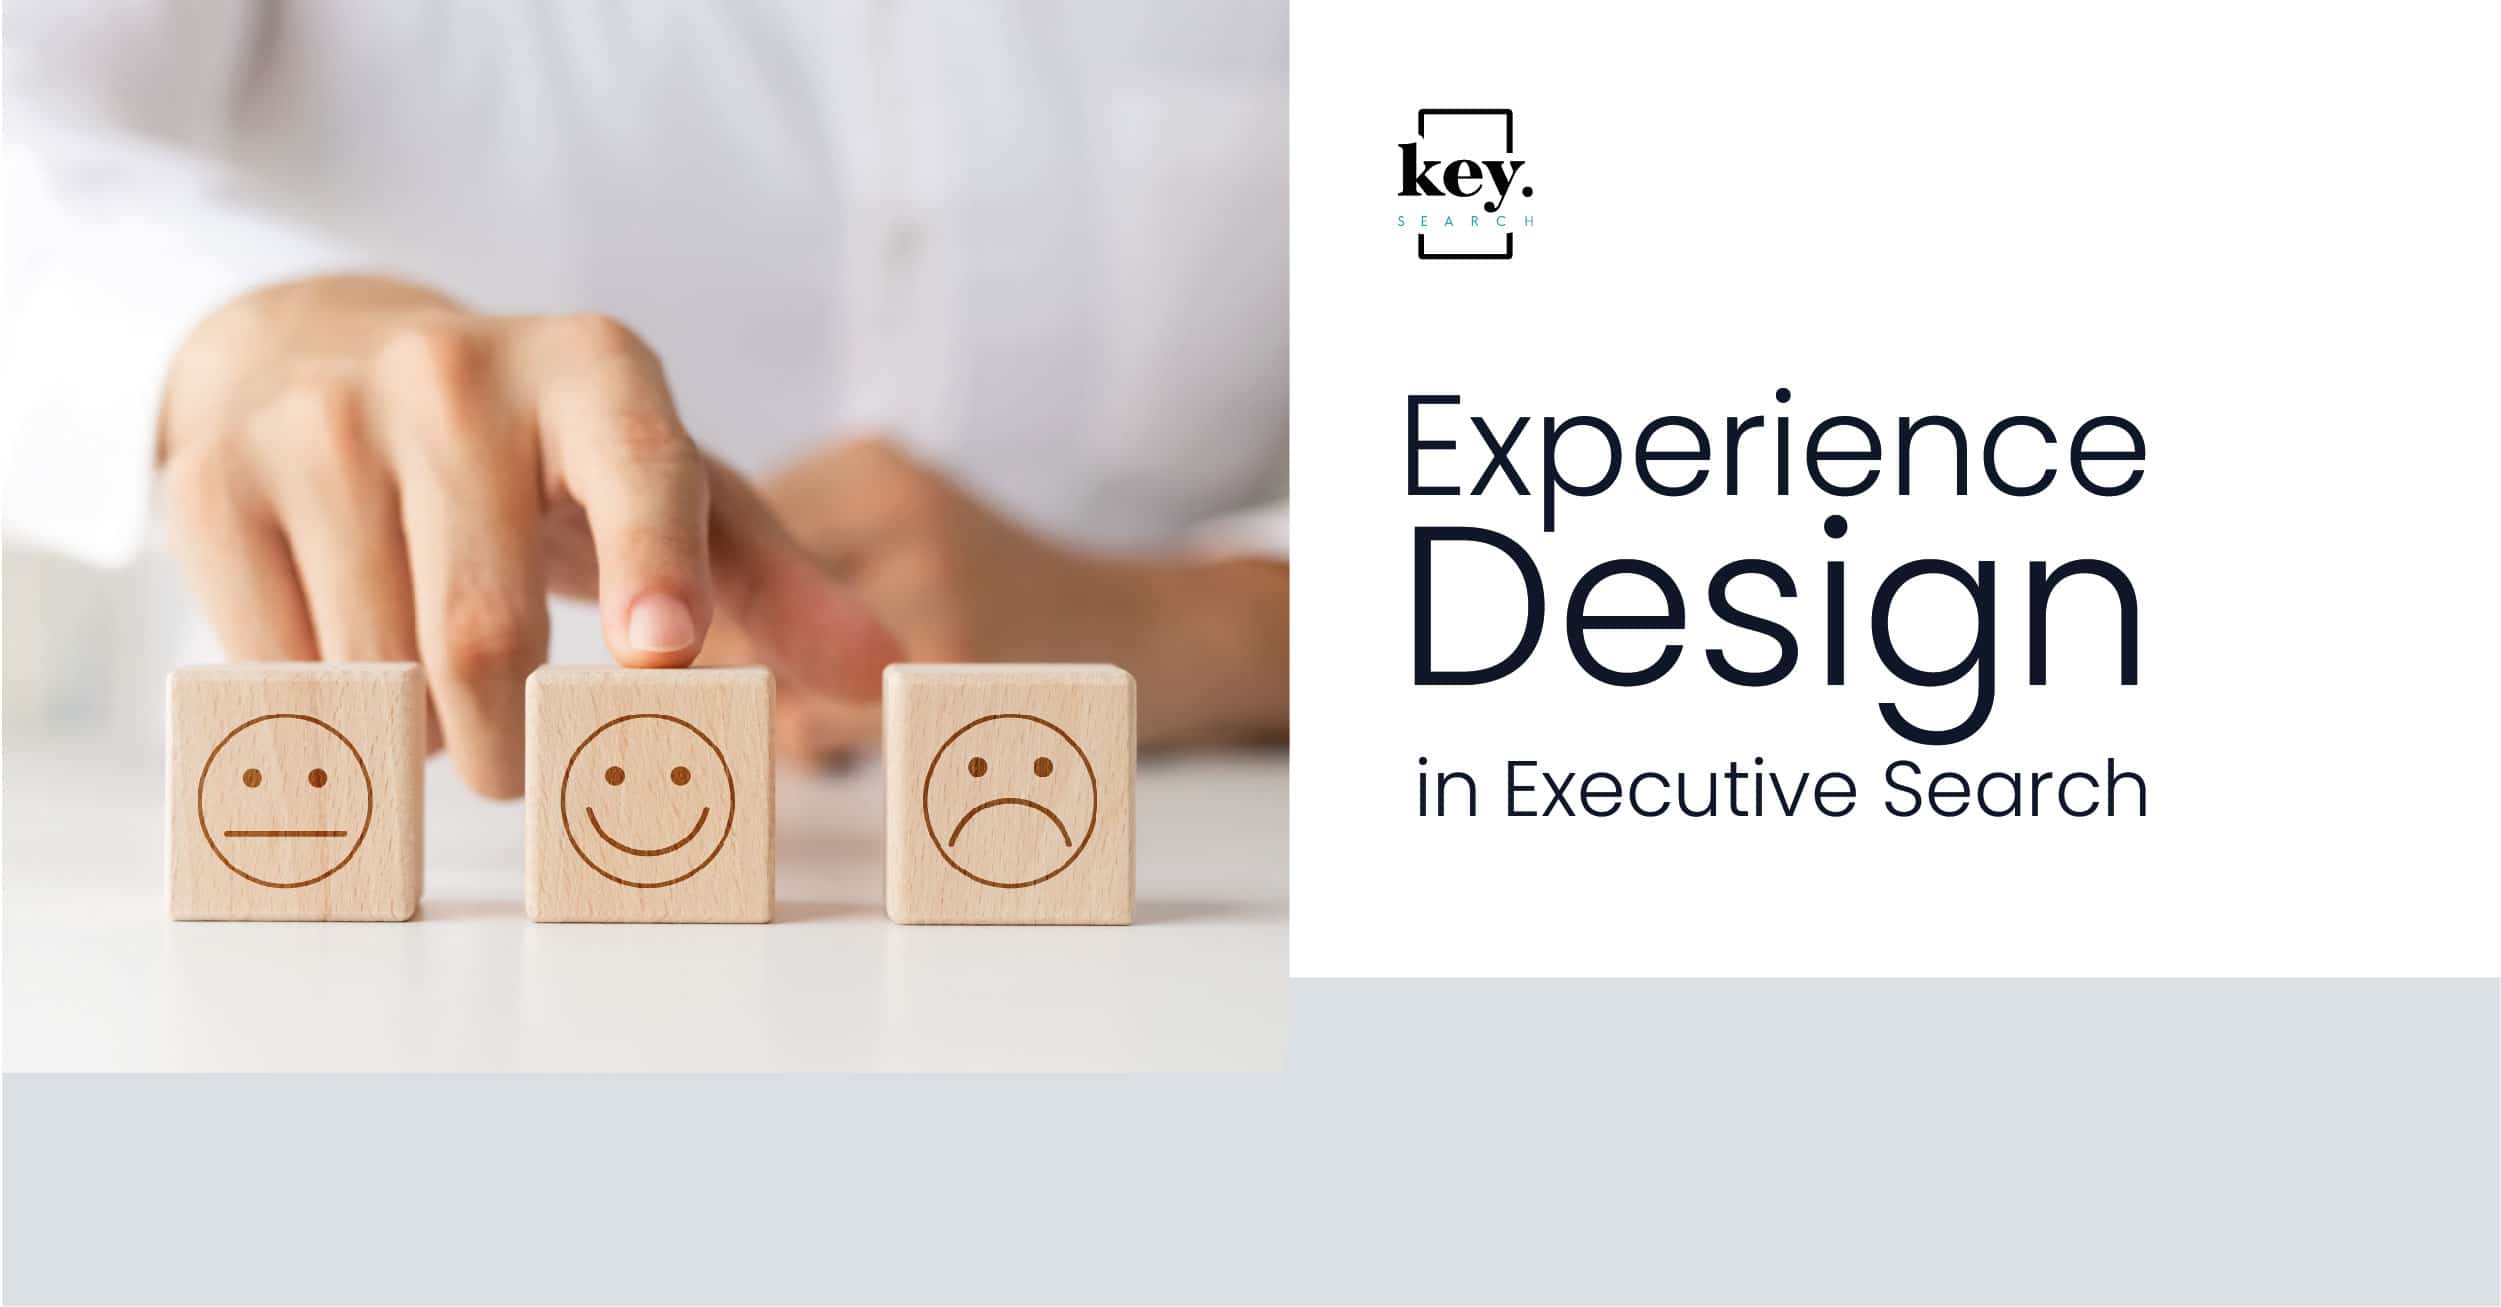 Blog-Post-experience-design_experience design in executive search